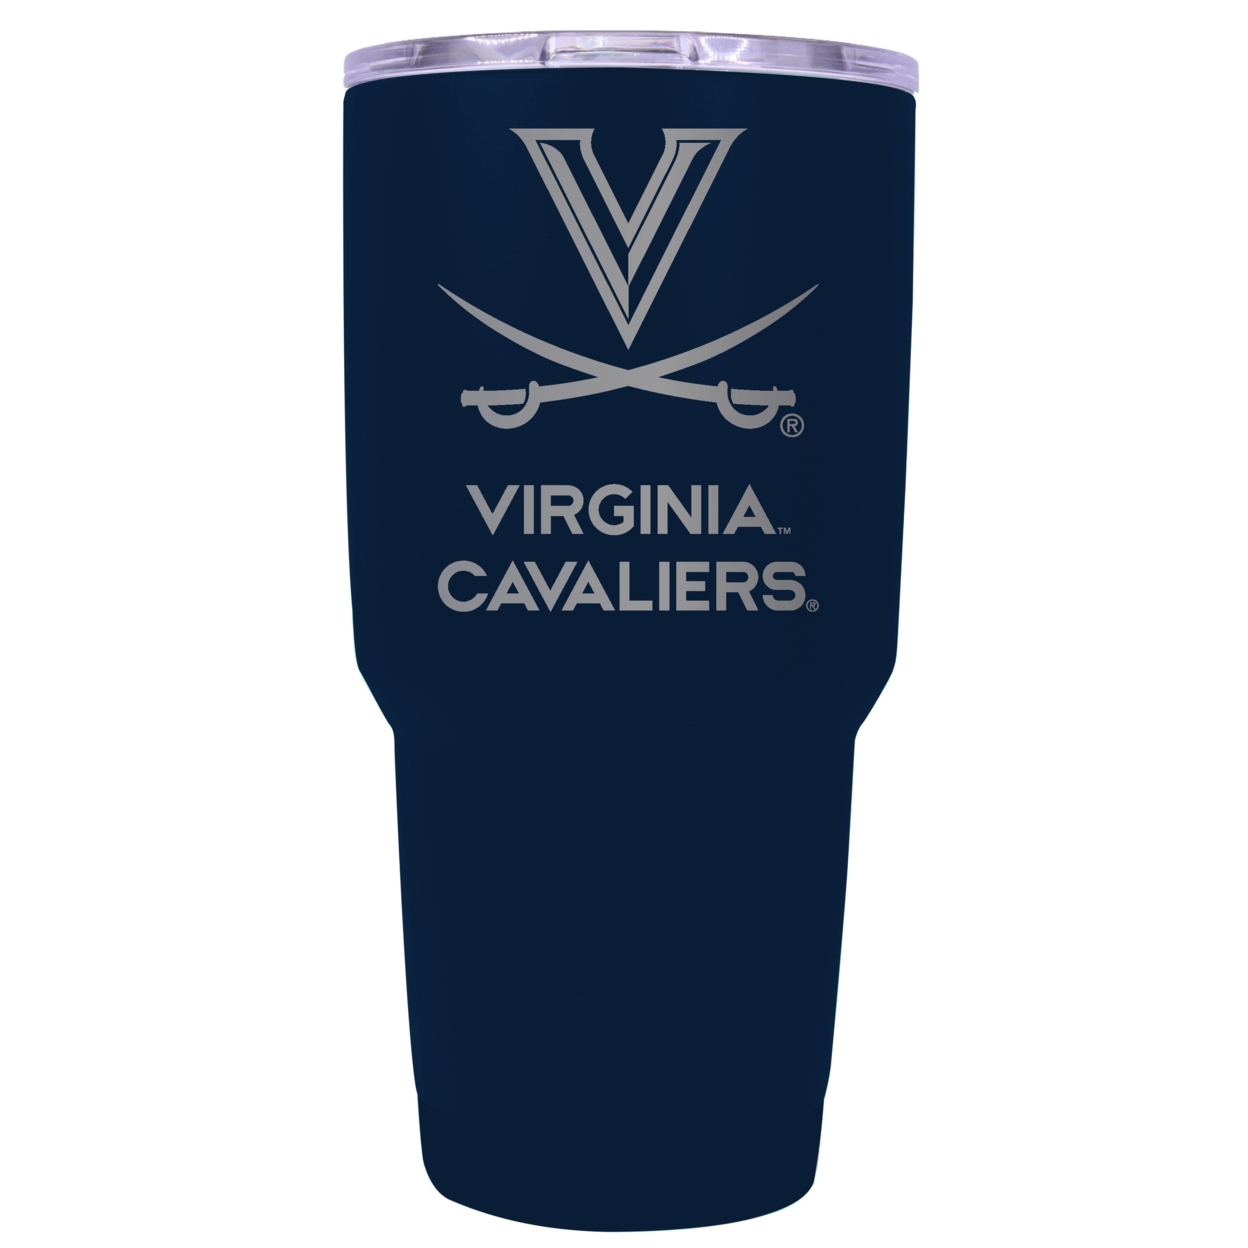 Virginia Cavaliers 24 Oz Laser Engraved Stainless Steel Insulated Tumbler - Choose Your Color. - Seafoam